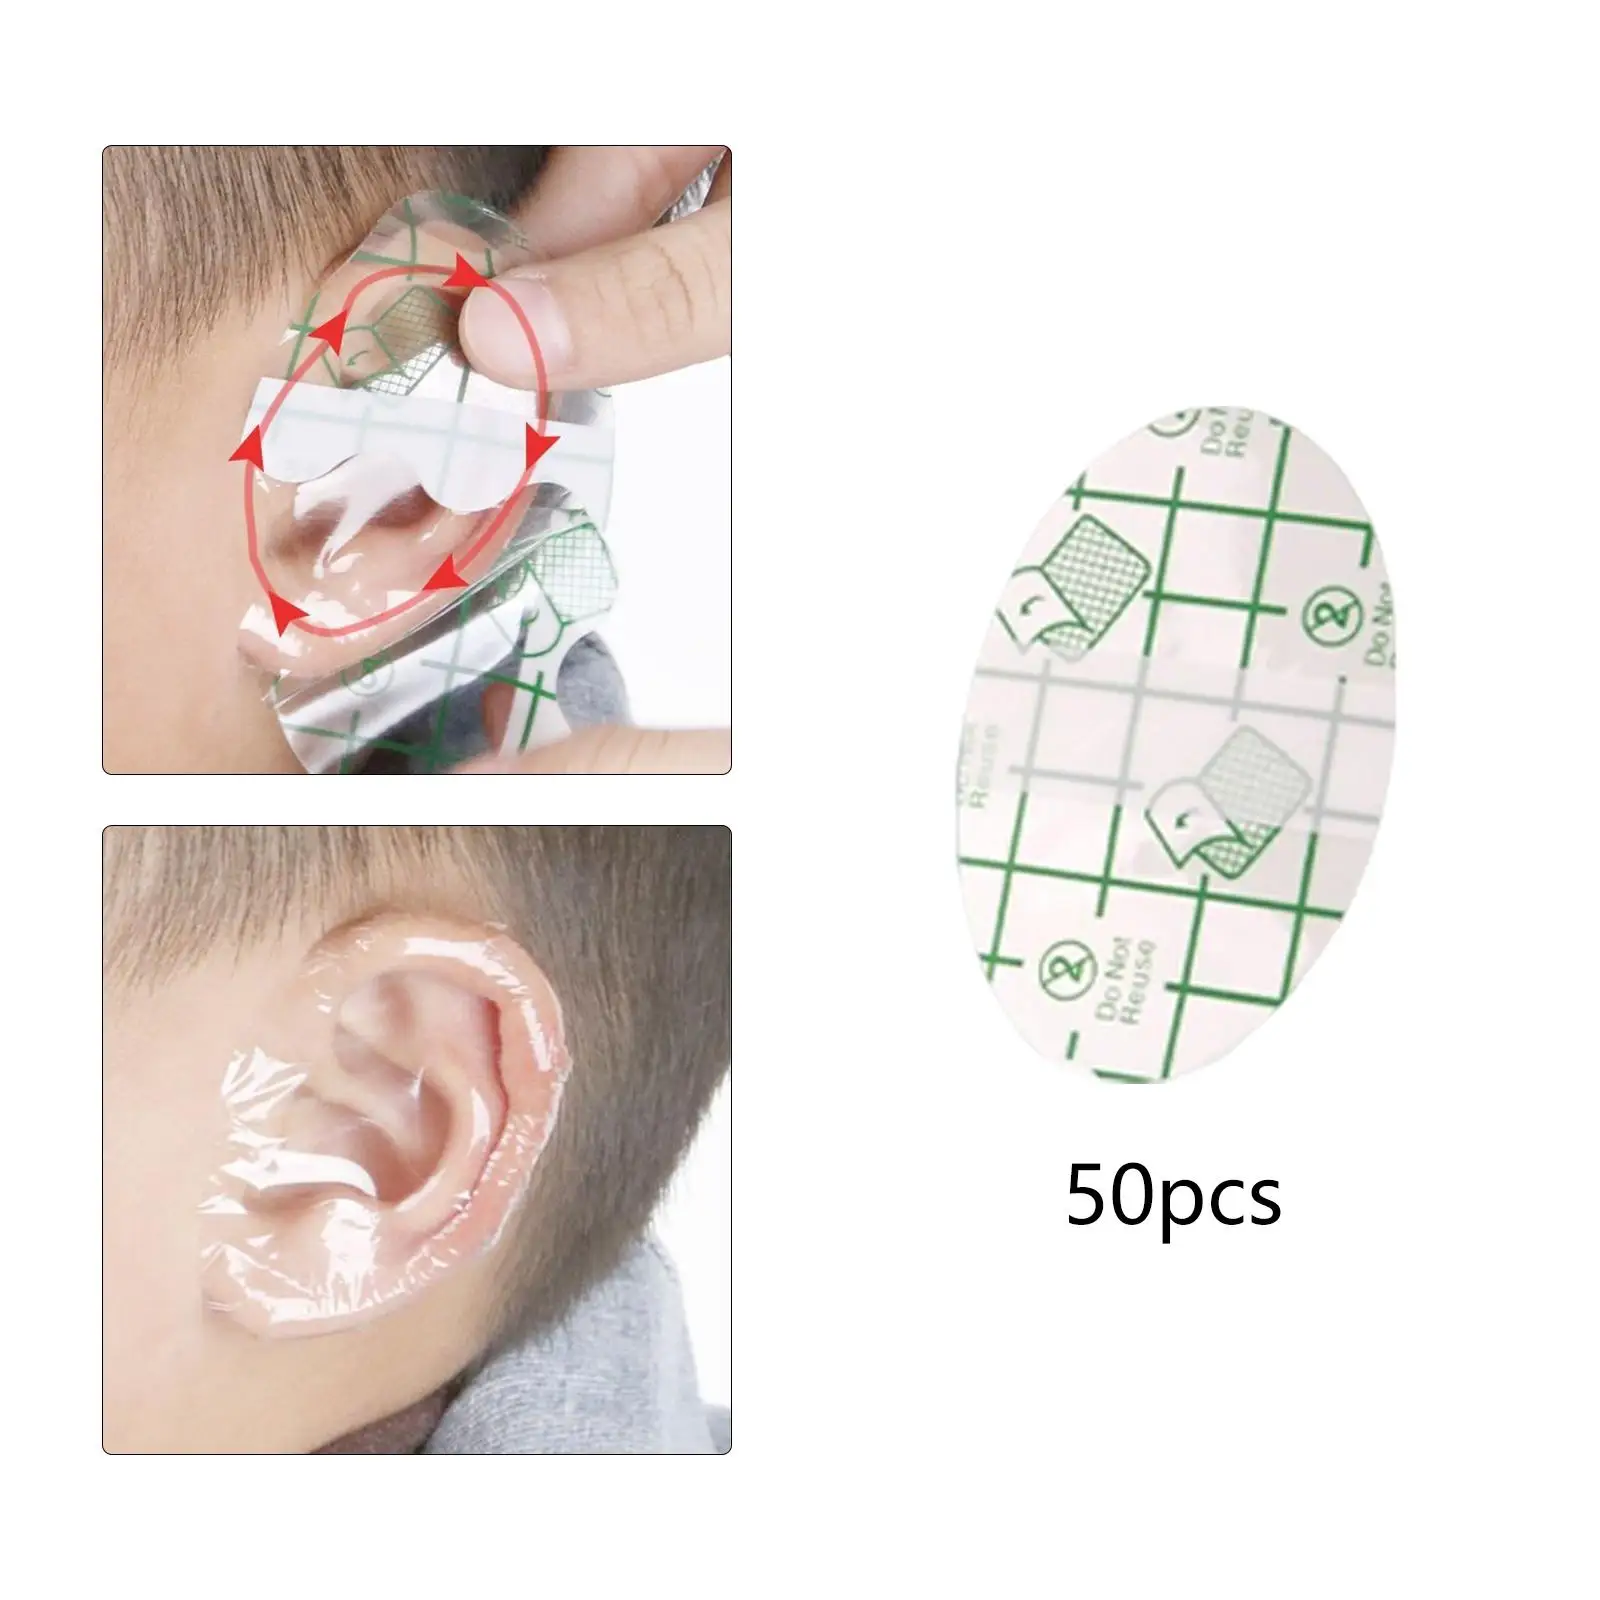 50x Baby Waterproof Ear Covers Disposable PU Film Breathable Ear Protection Covers for Shower Swimming Bathing Surfing Newborn